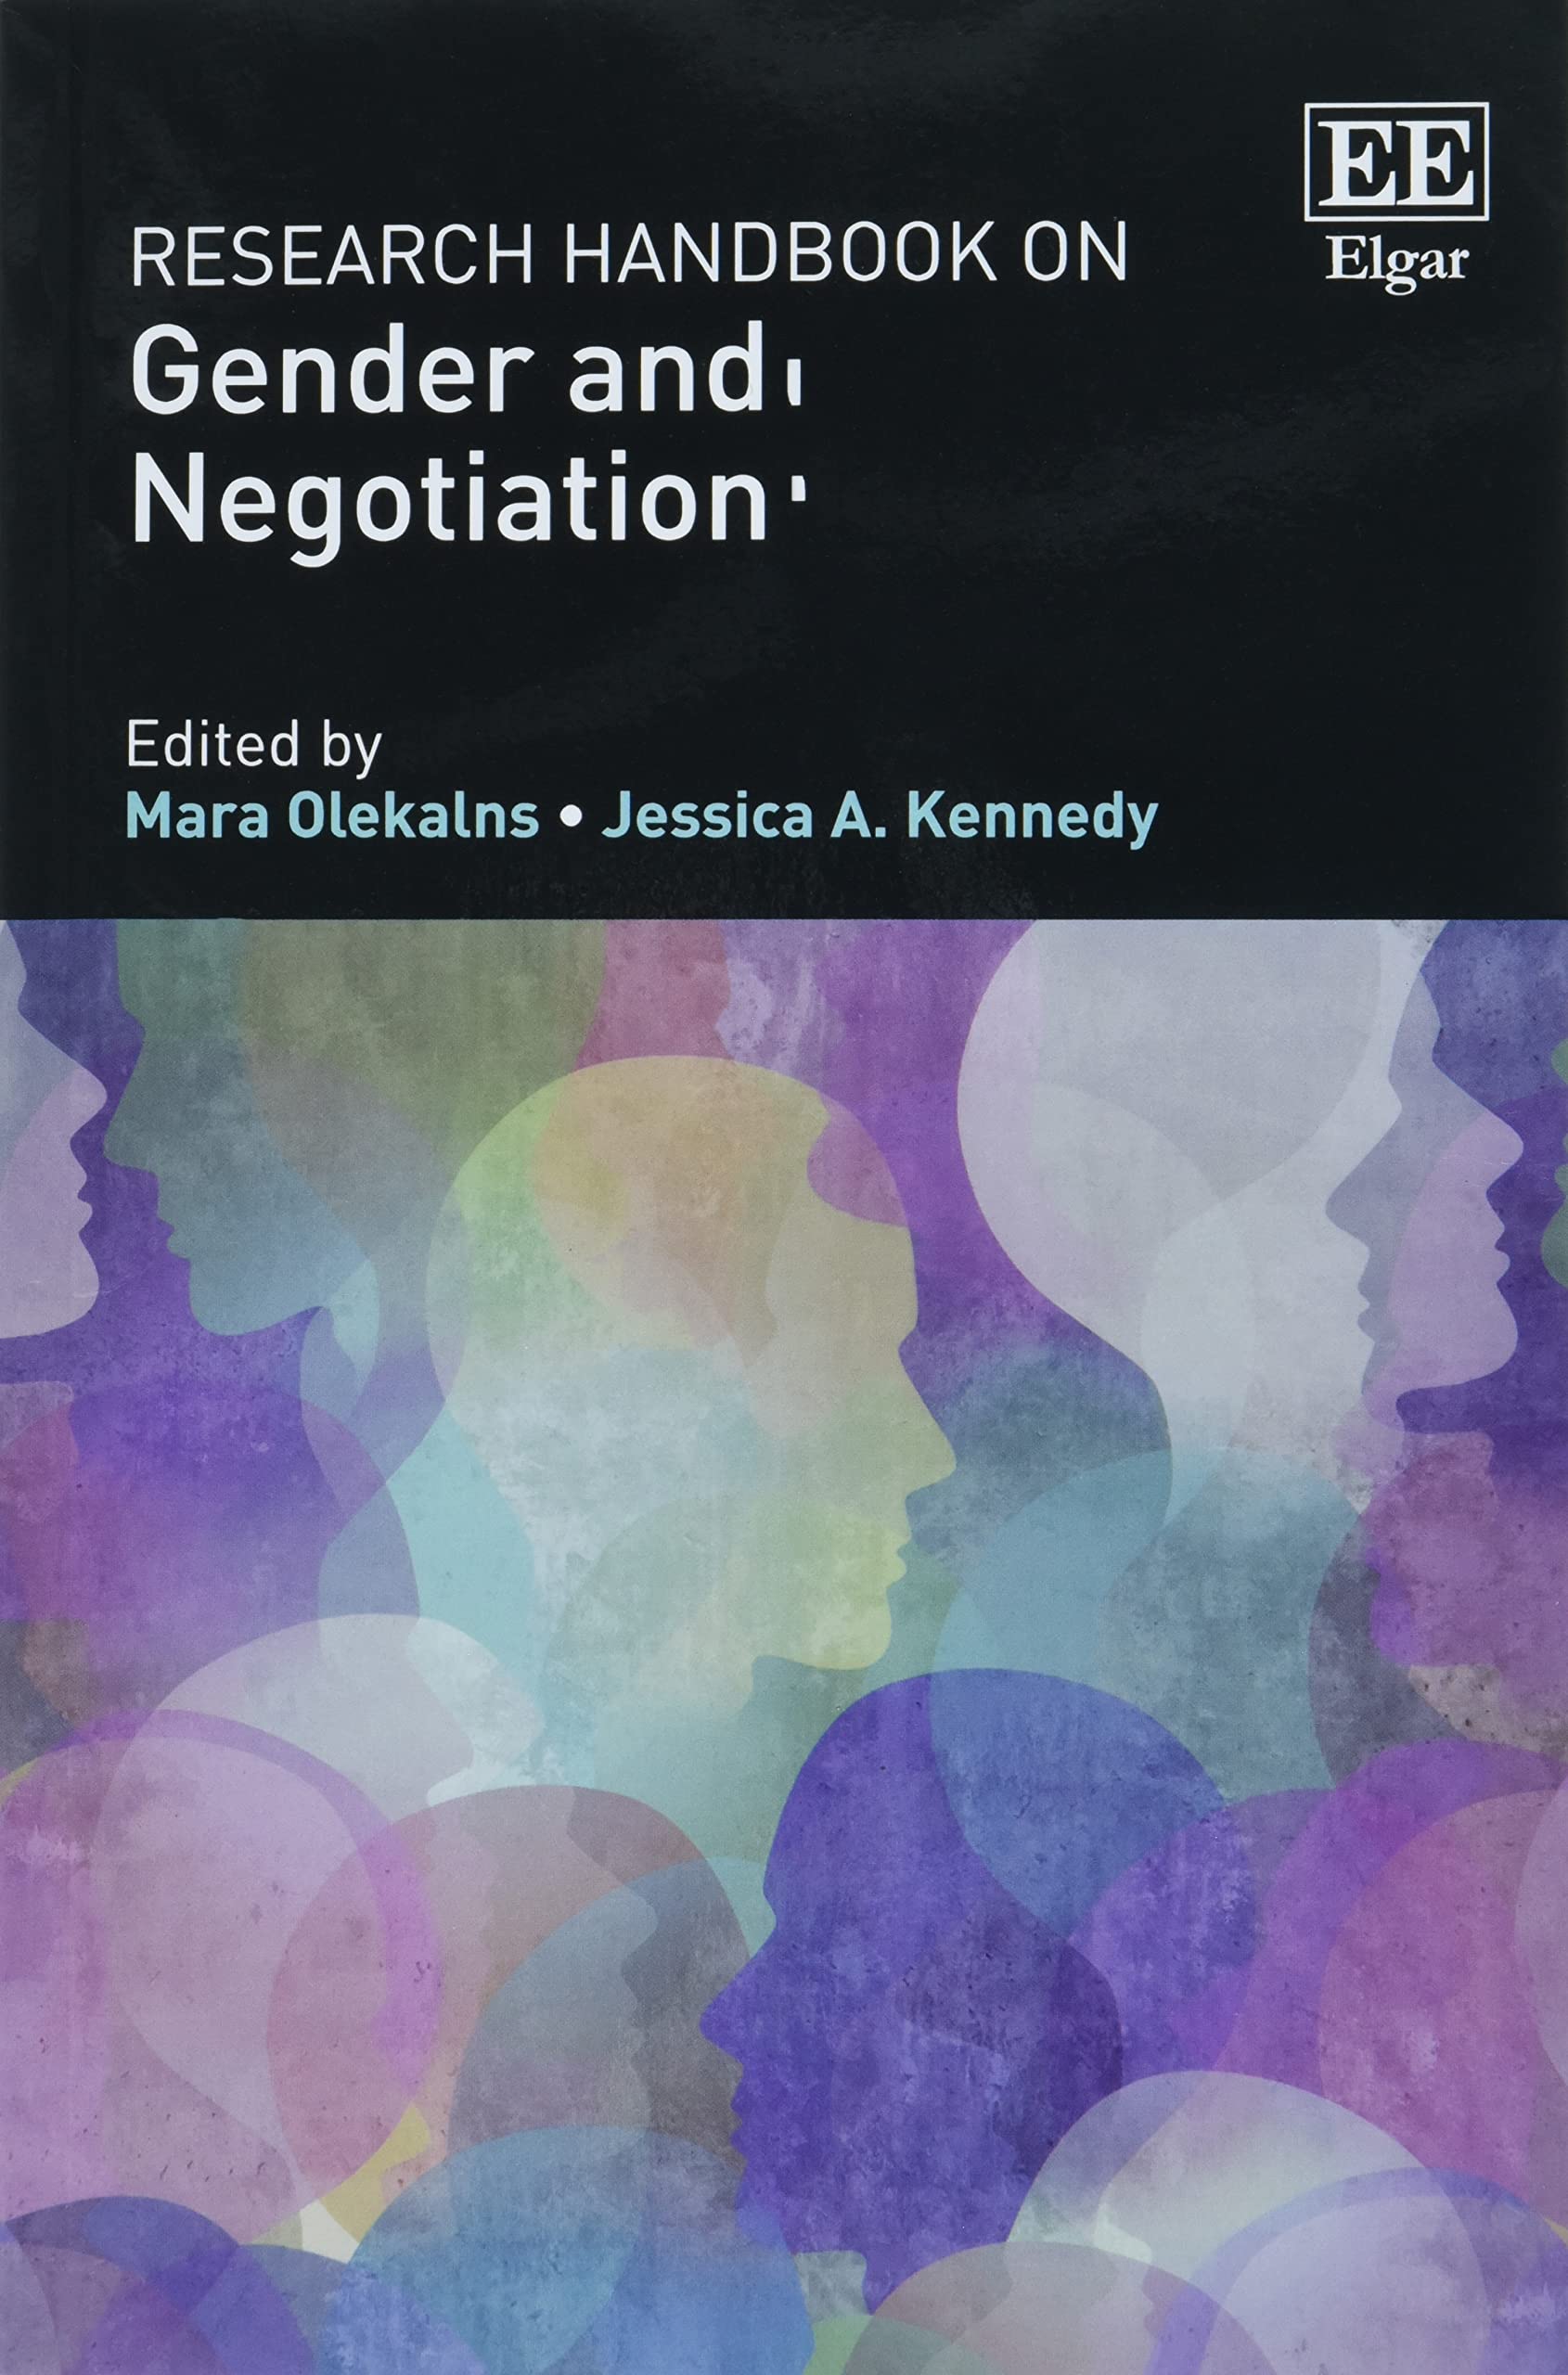 Research Handbook on Gender and Negotiation (Research Handbooks in Business and Management series)